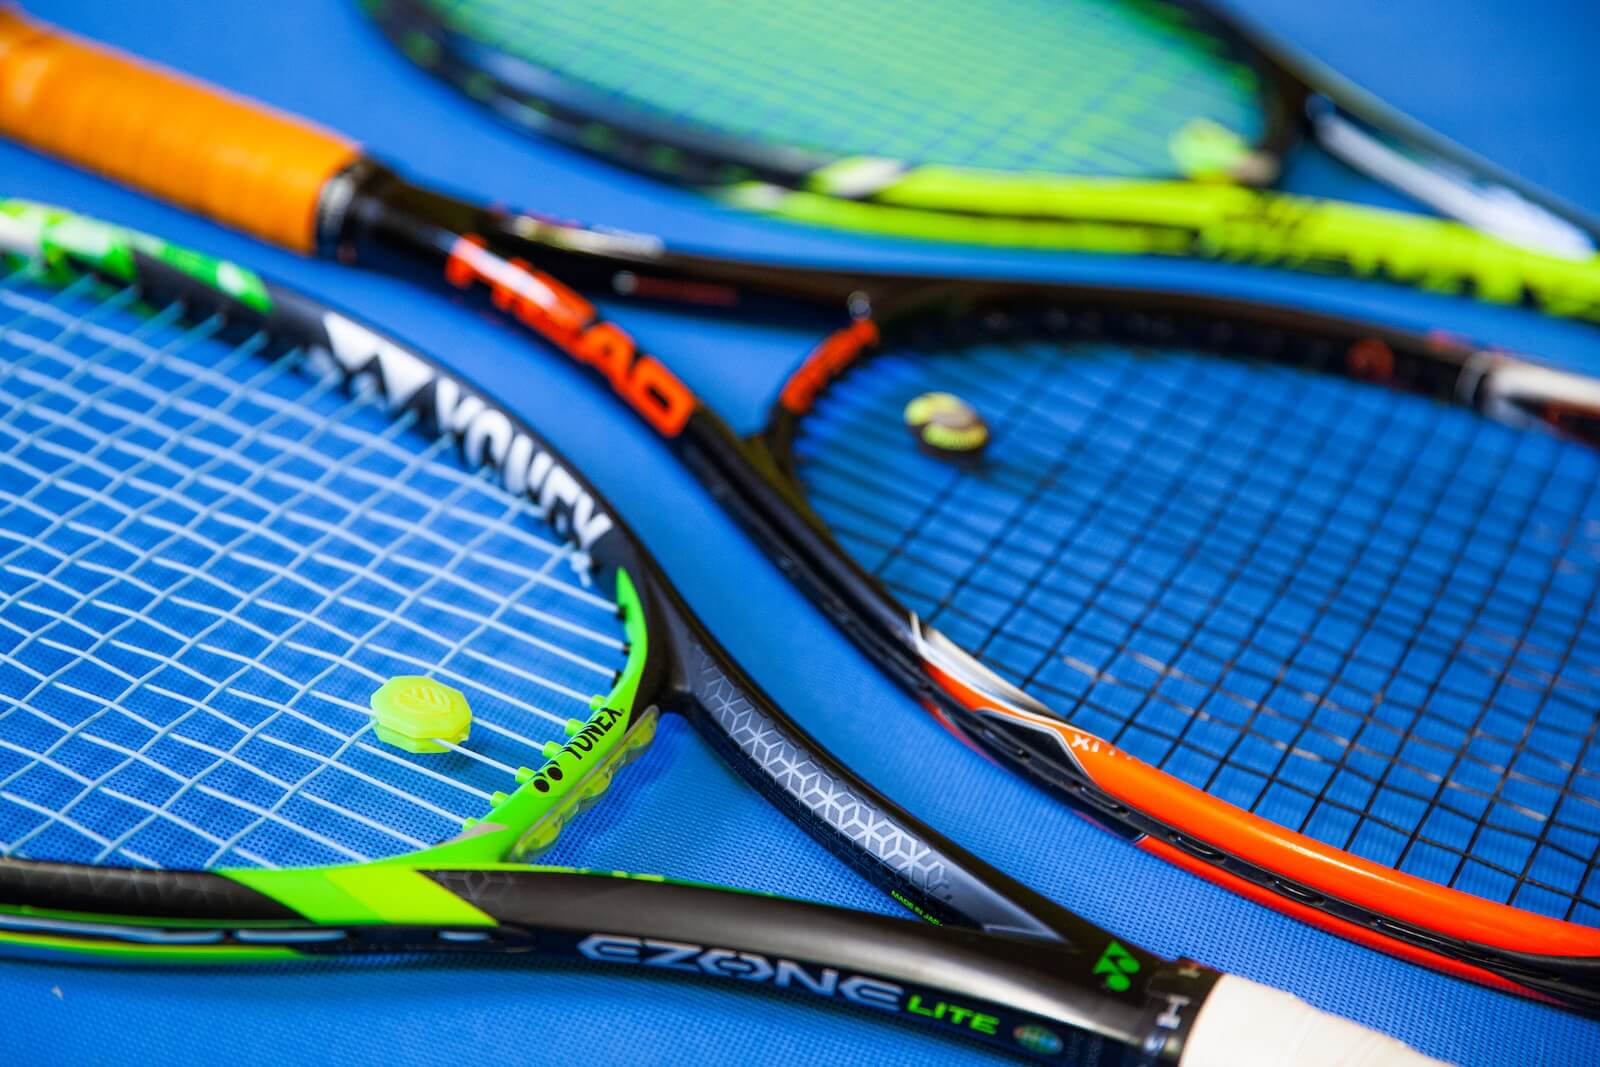 green and black tennis racket with others on ground